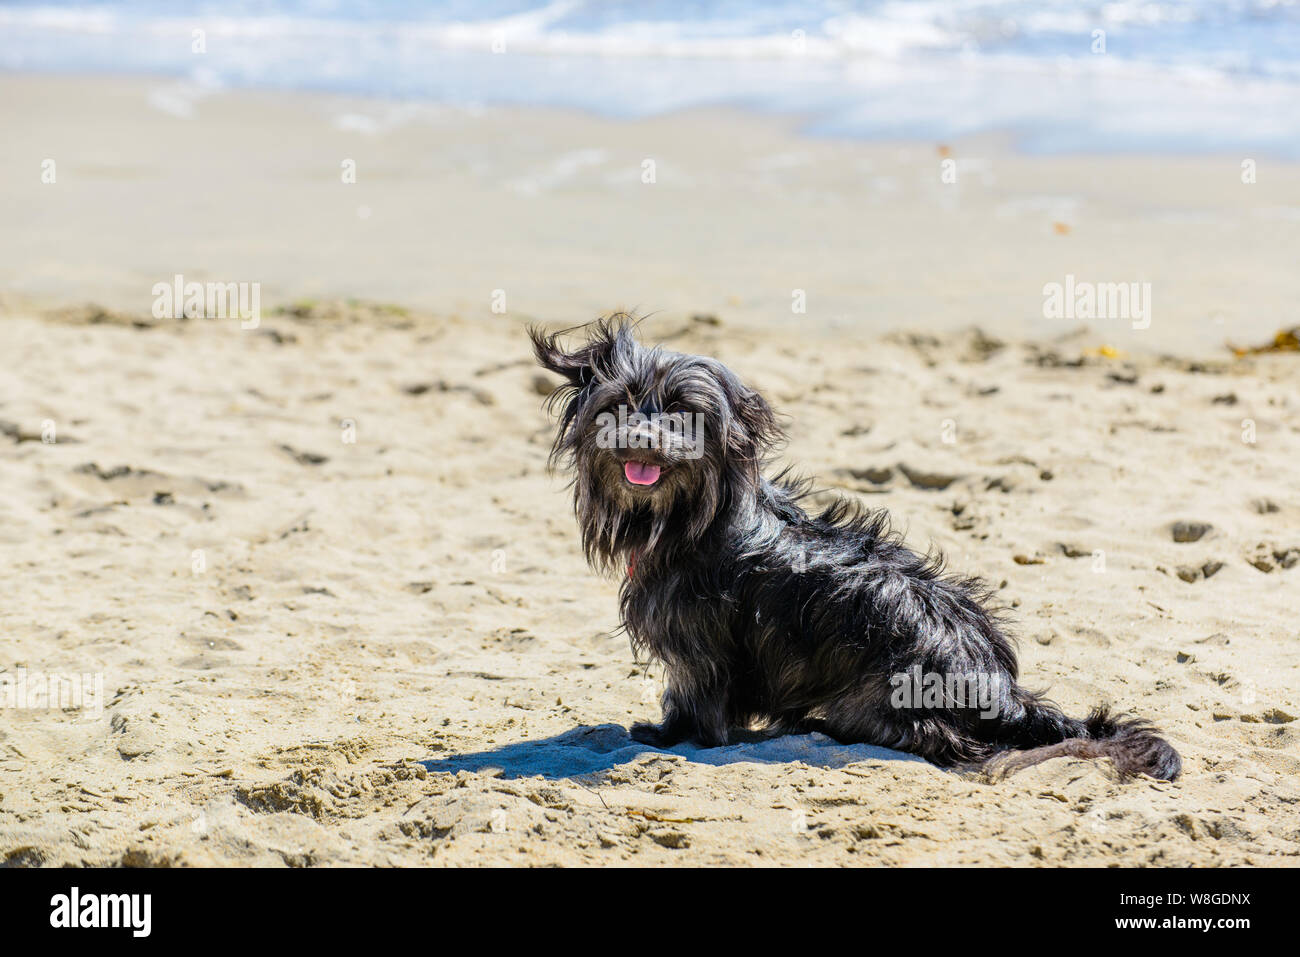 Ninja the Naughty Instagram dog enjoying her tongue out Tuesday day on the beach basking in the sun and sea air. Stock Photo